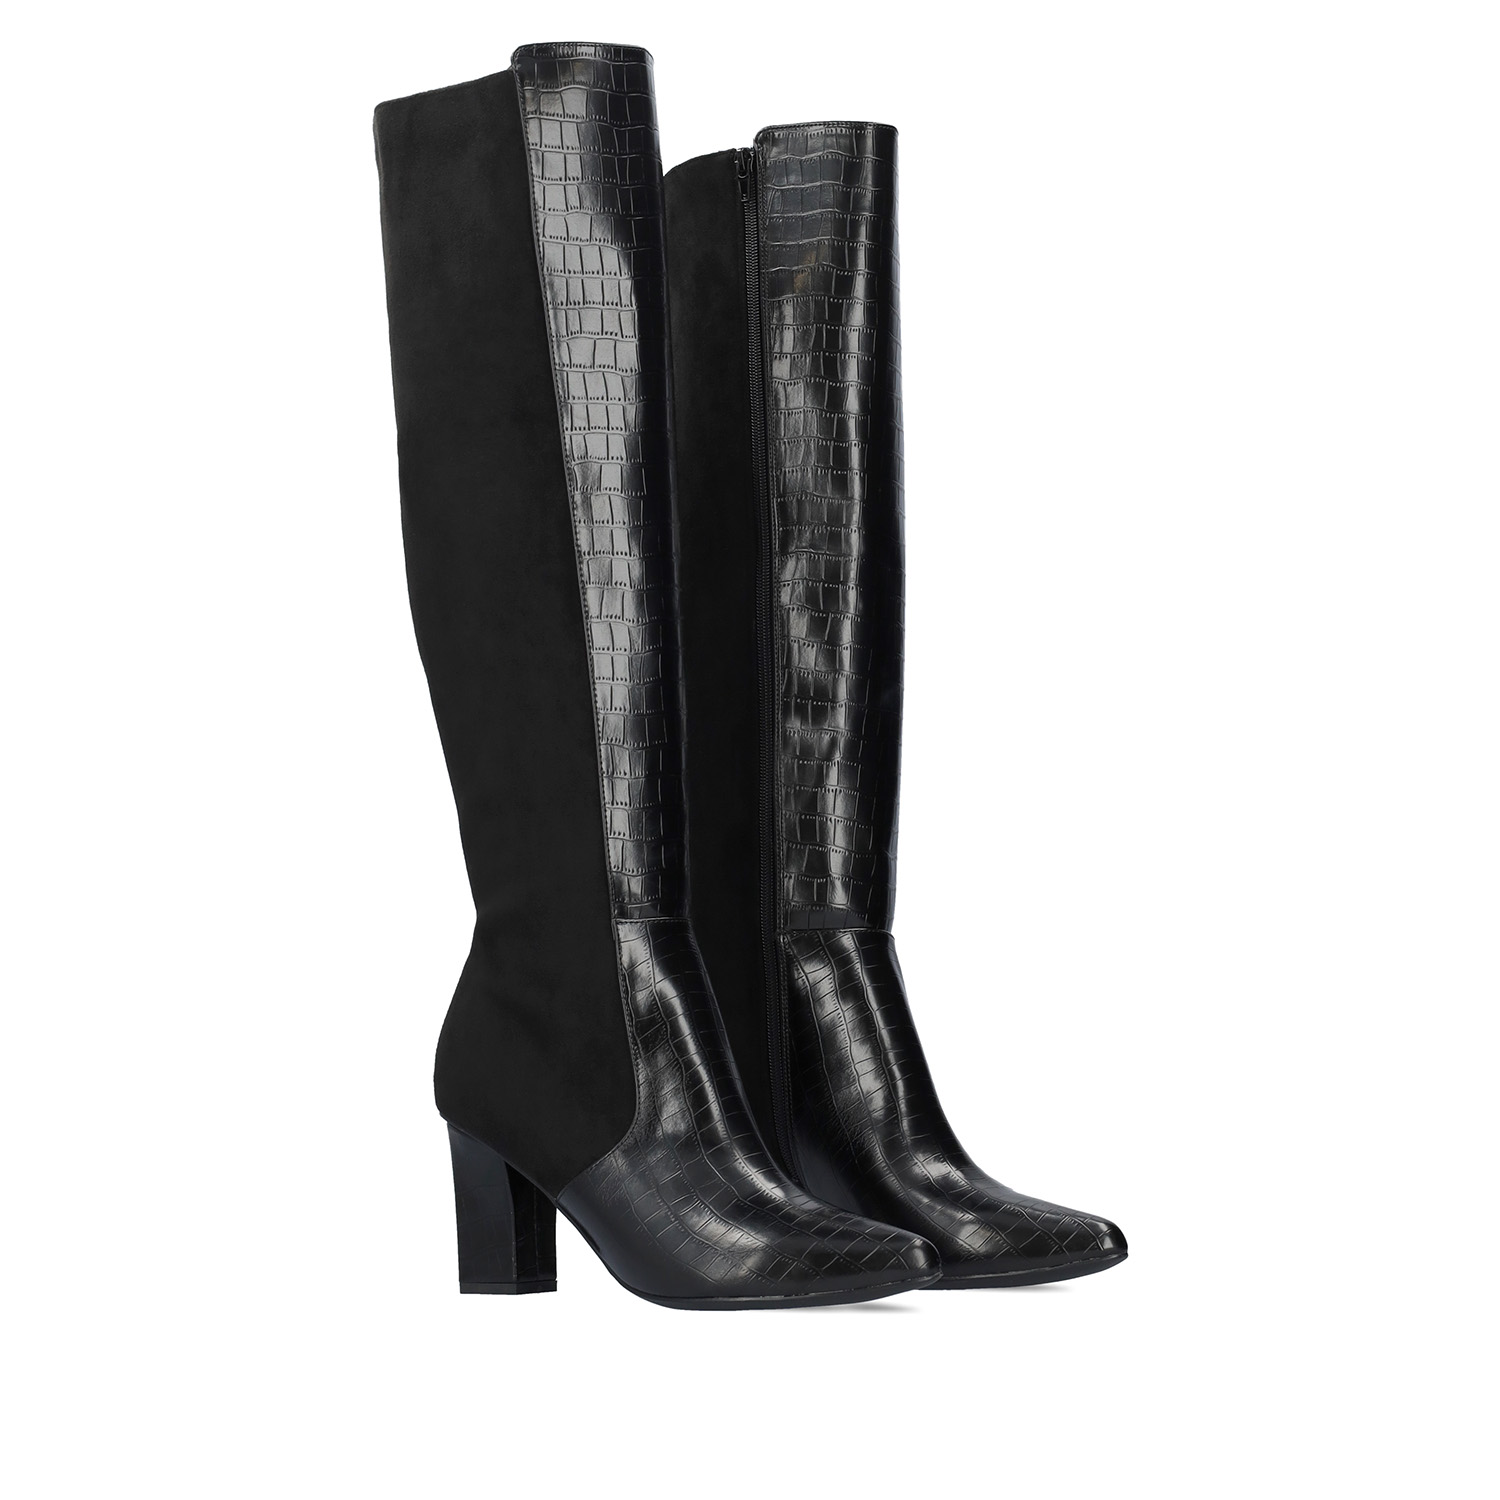 Heeled knee-high boots combined black faux croc leather with faux suede. 